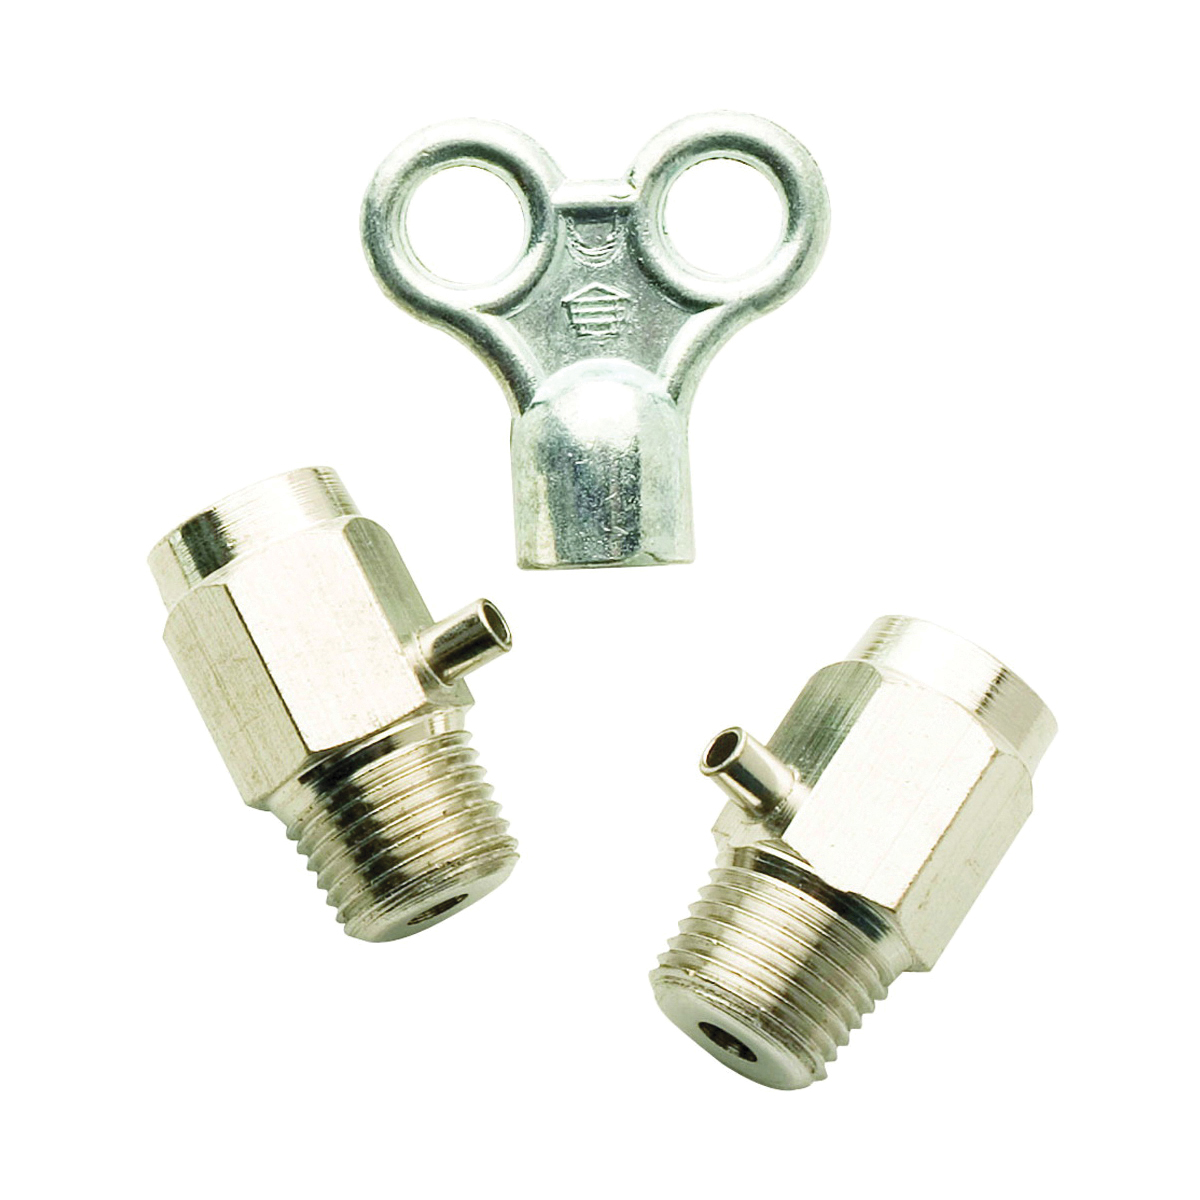 PP827-9 Loose Key Air Valve with Key, 1/8-27 in Connection, NPT, Brass, Chrome